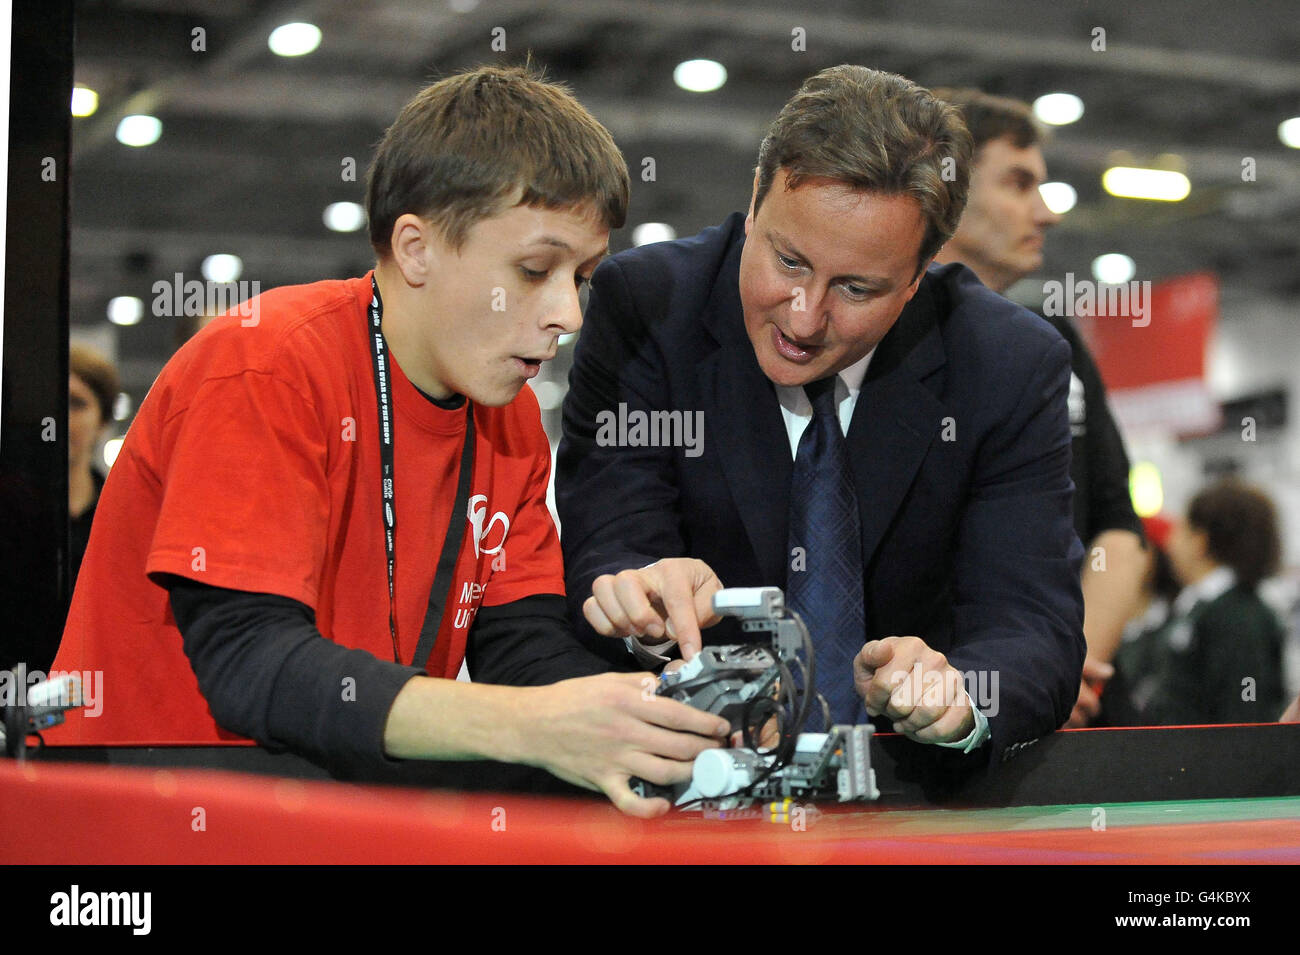 Julian Hooper, a student in Product Design at Middlesex University, explains a robotic vehicle to Prime Minister David Cameron, during a visit to the World Skills London 2011 exhibition at the ExCeL Centre. Stock Photo